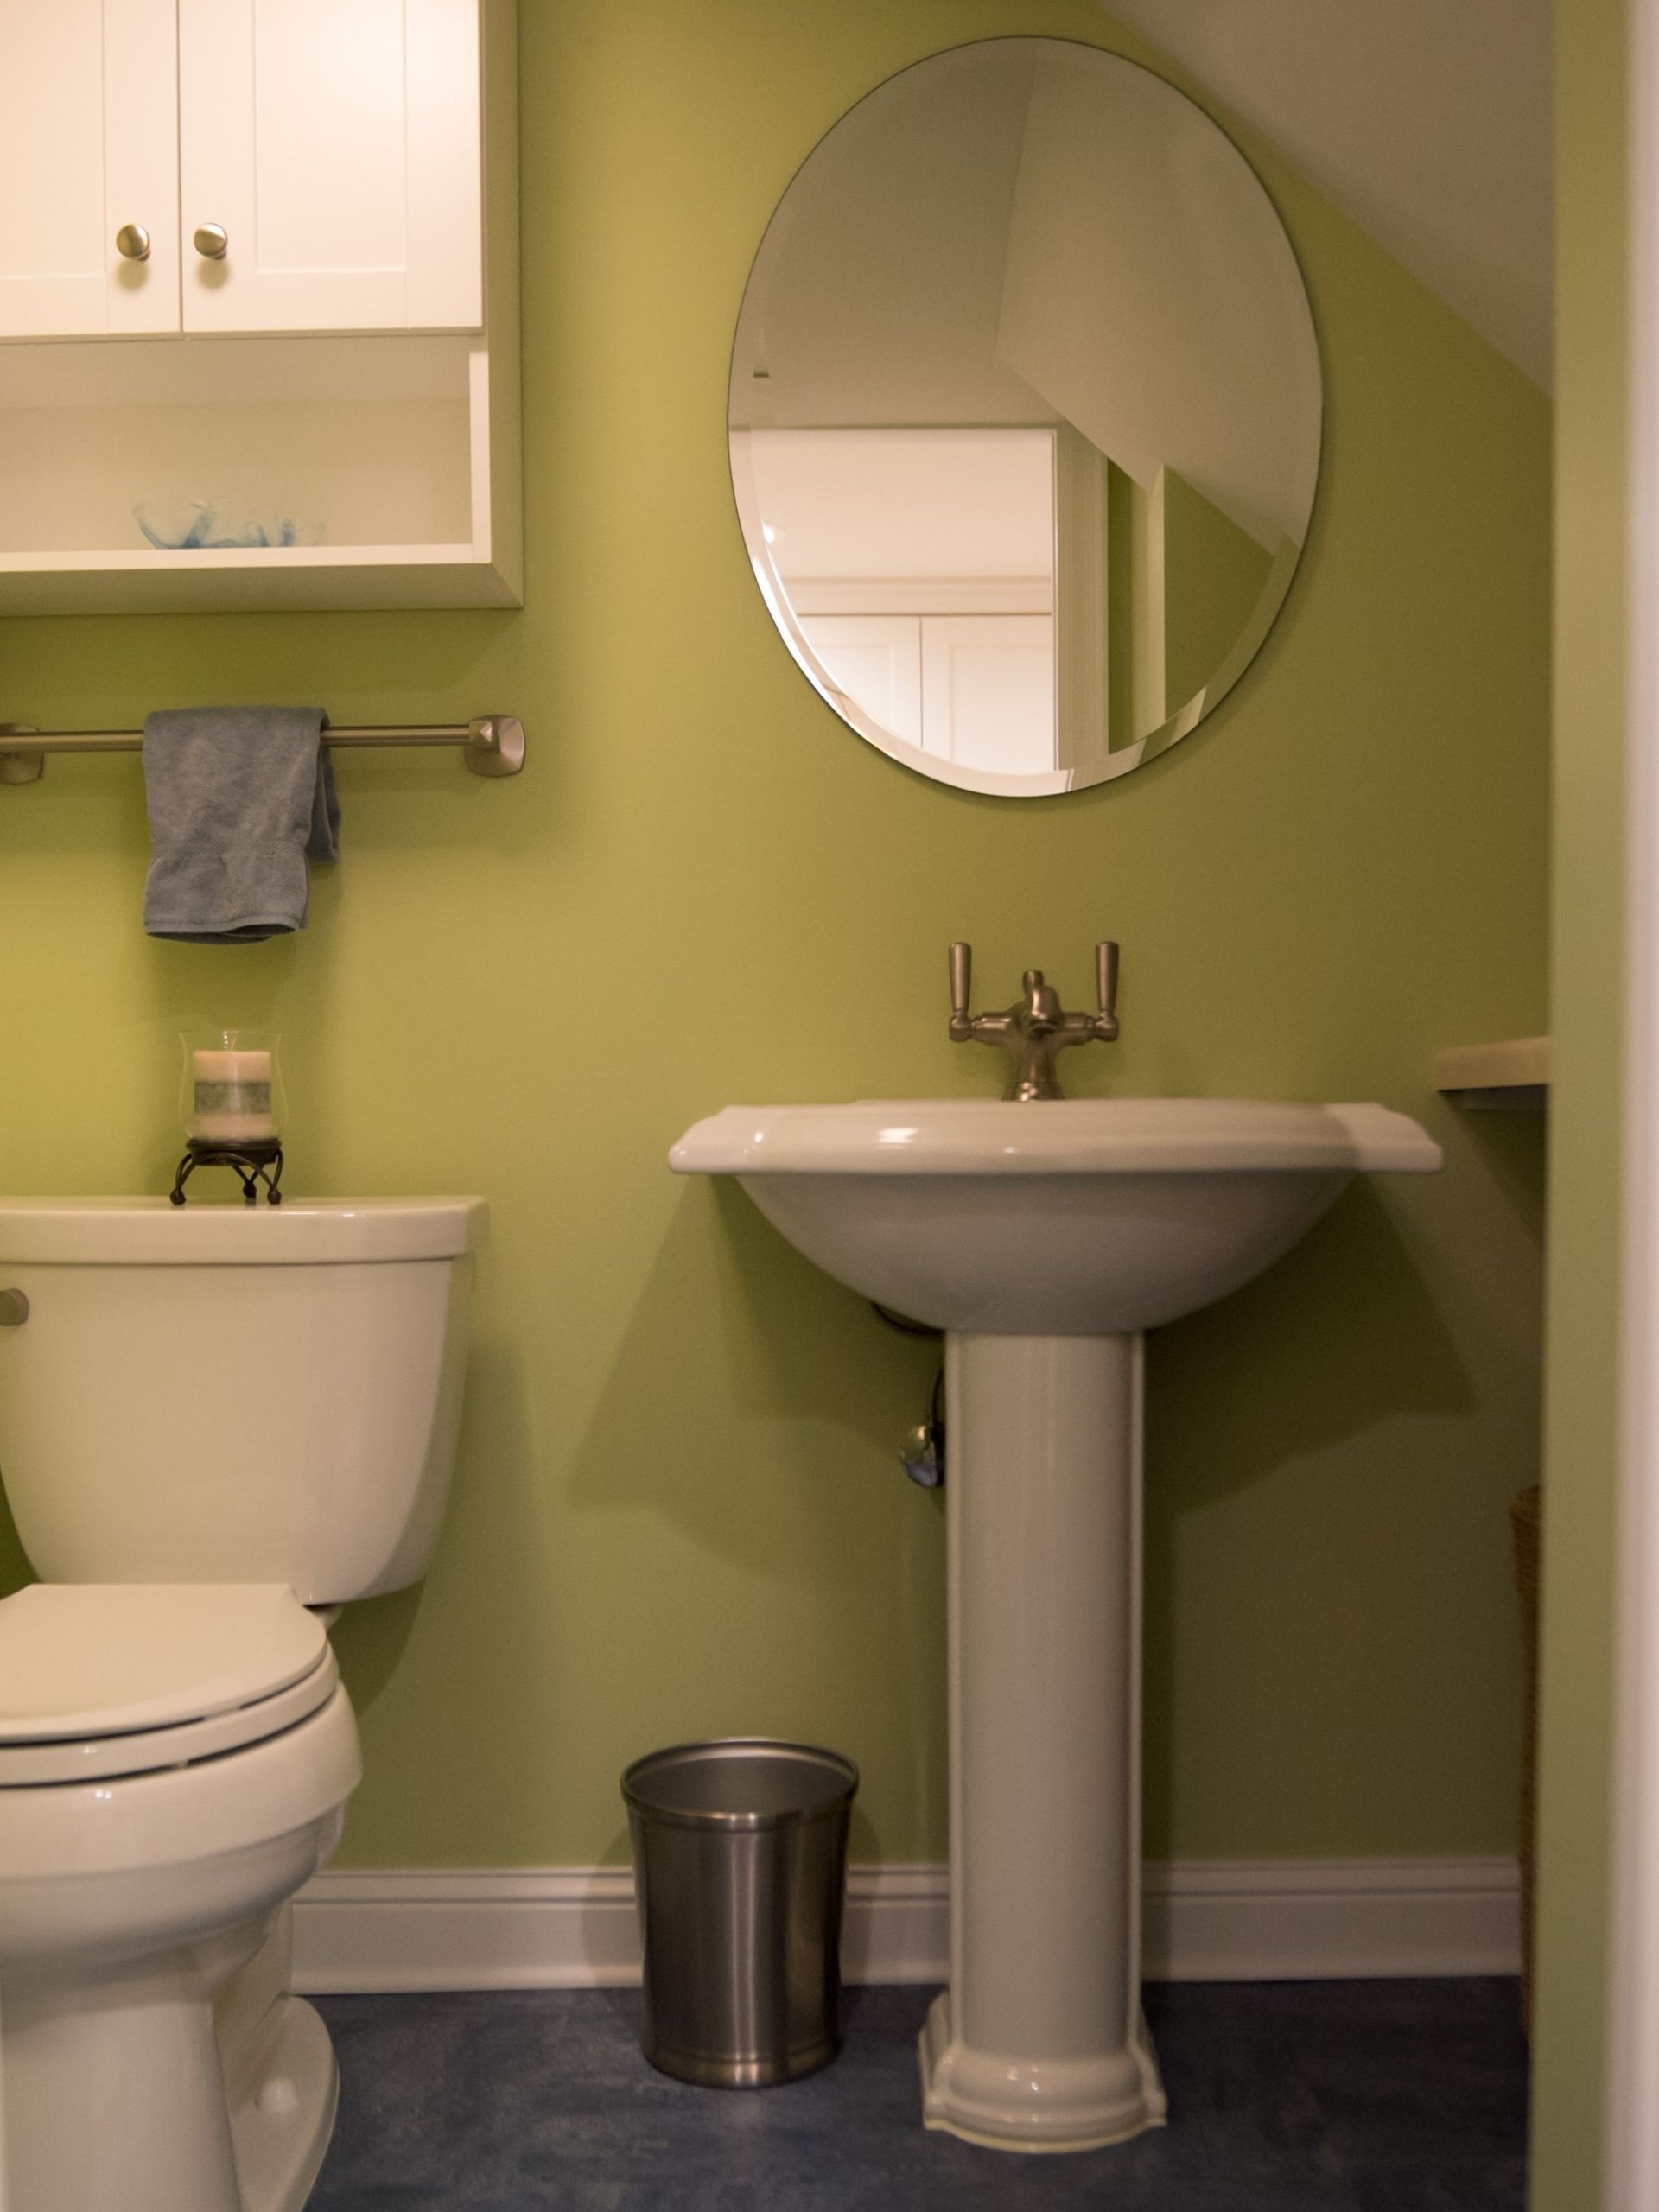 basement remodeling ideas: Green basement bathroom with toilet, sink and mirror